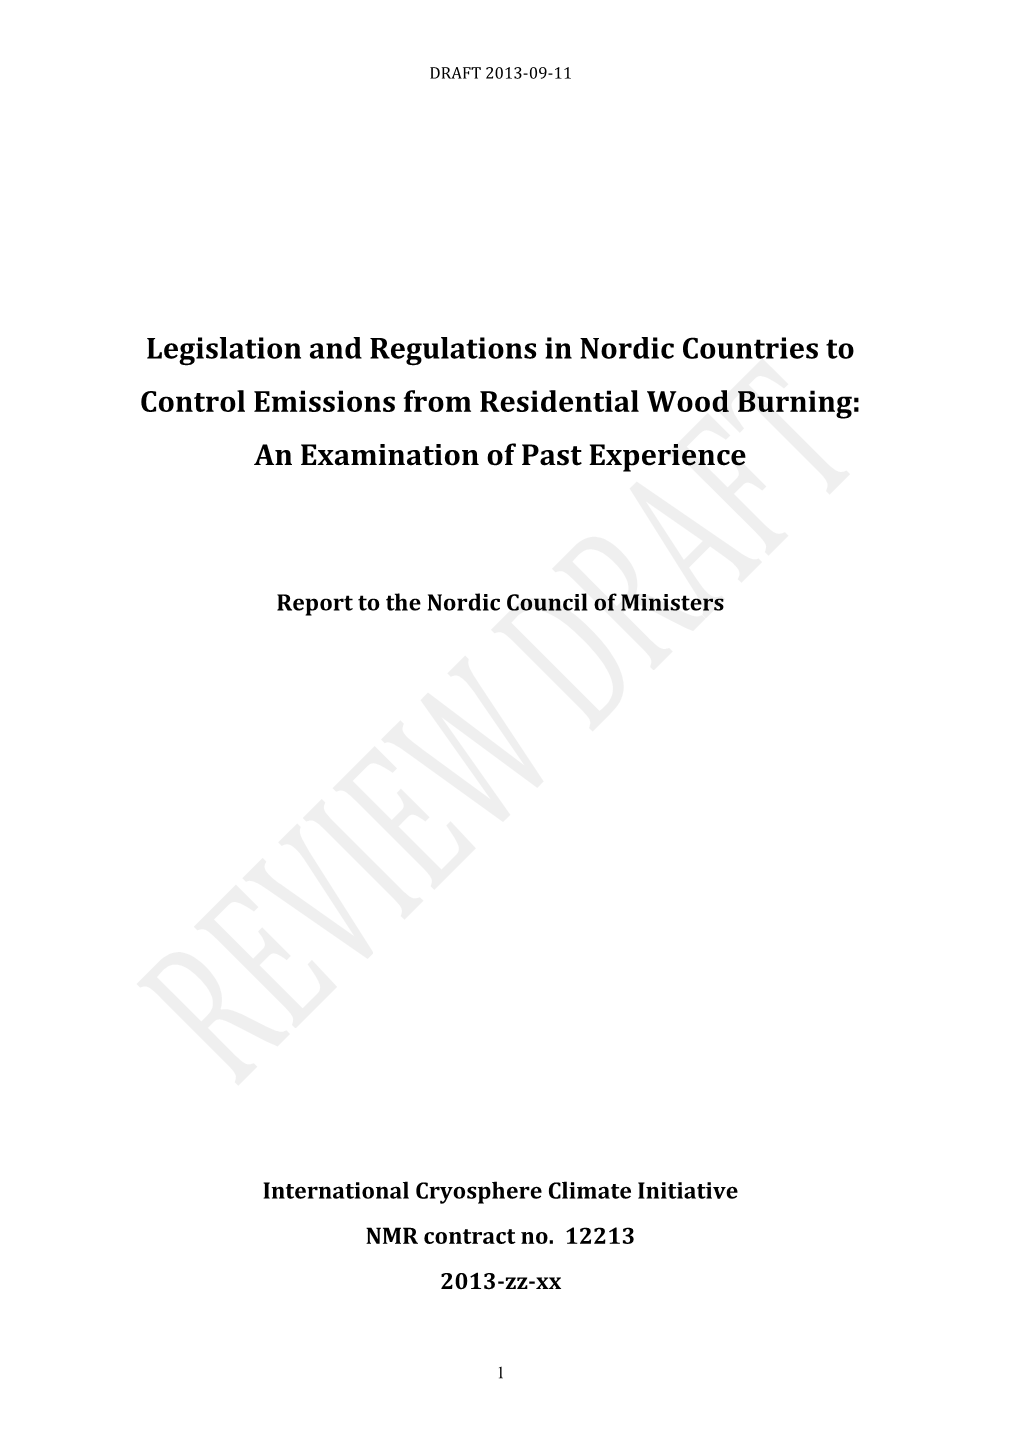 Legislation and Regulations in Nordic Countries To